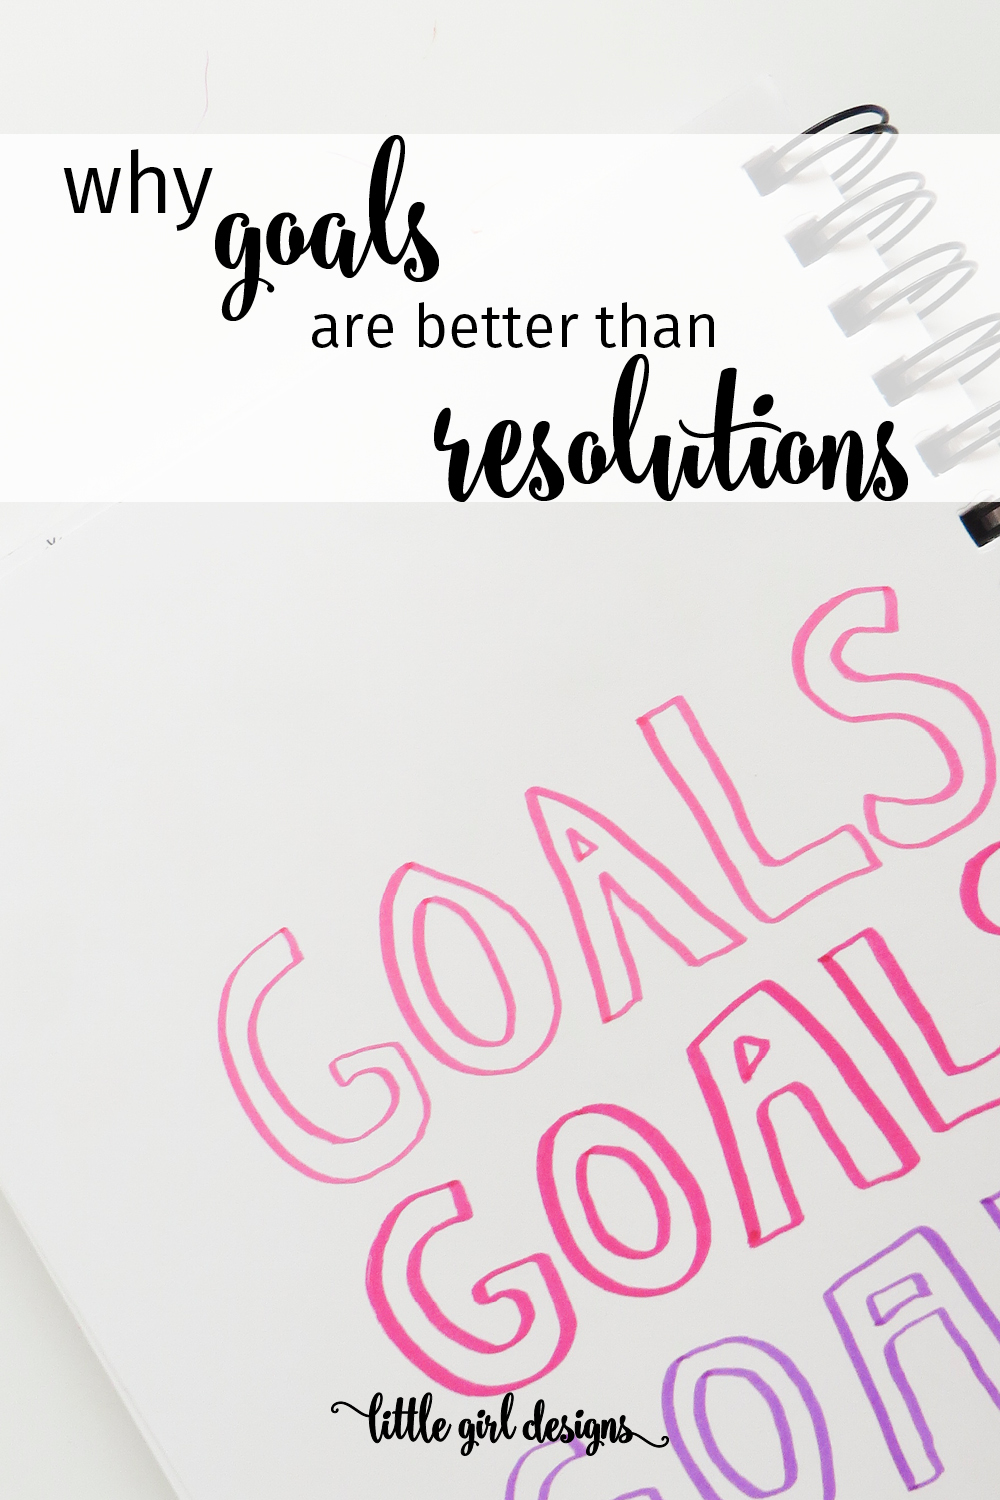 How to Make Goals Instead of Resolutions